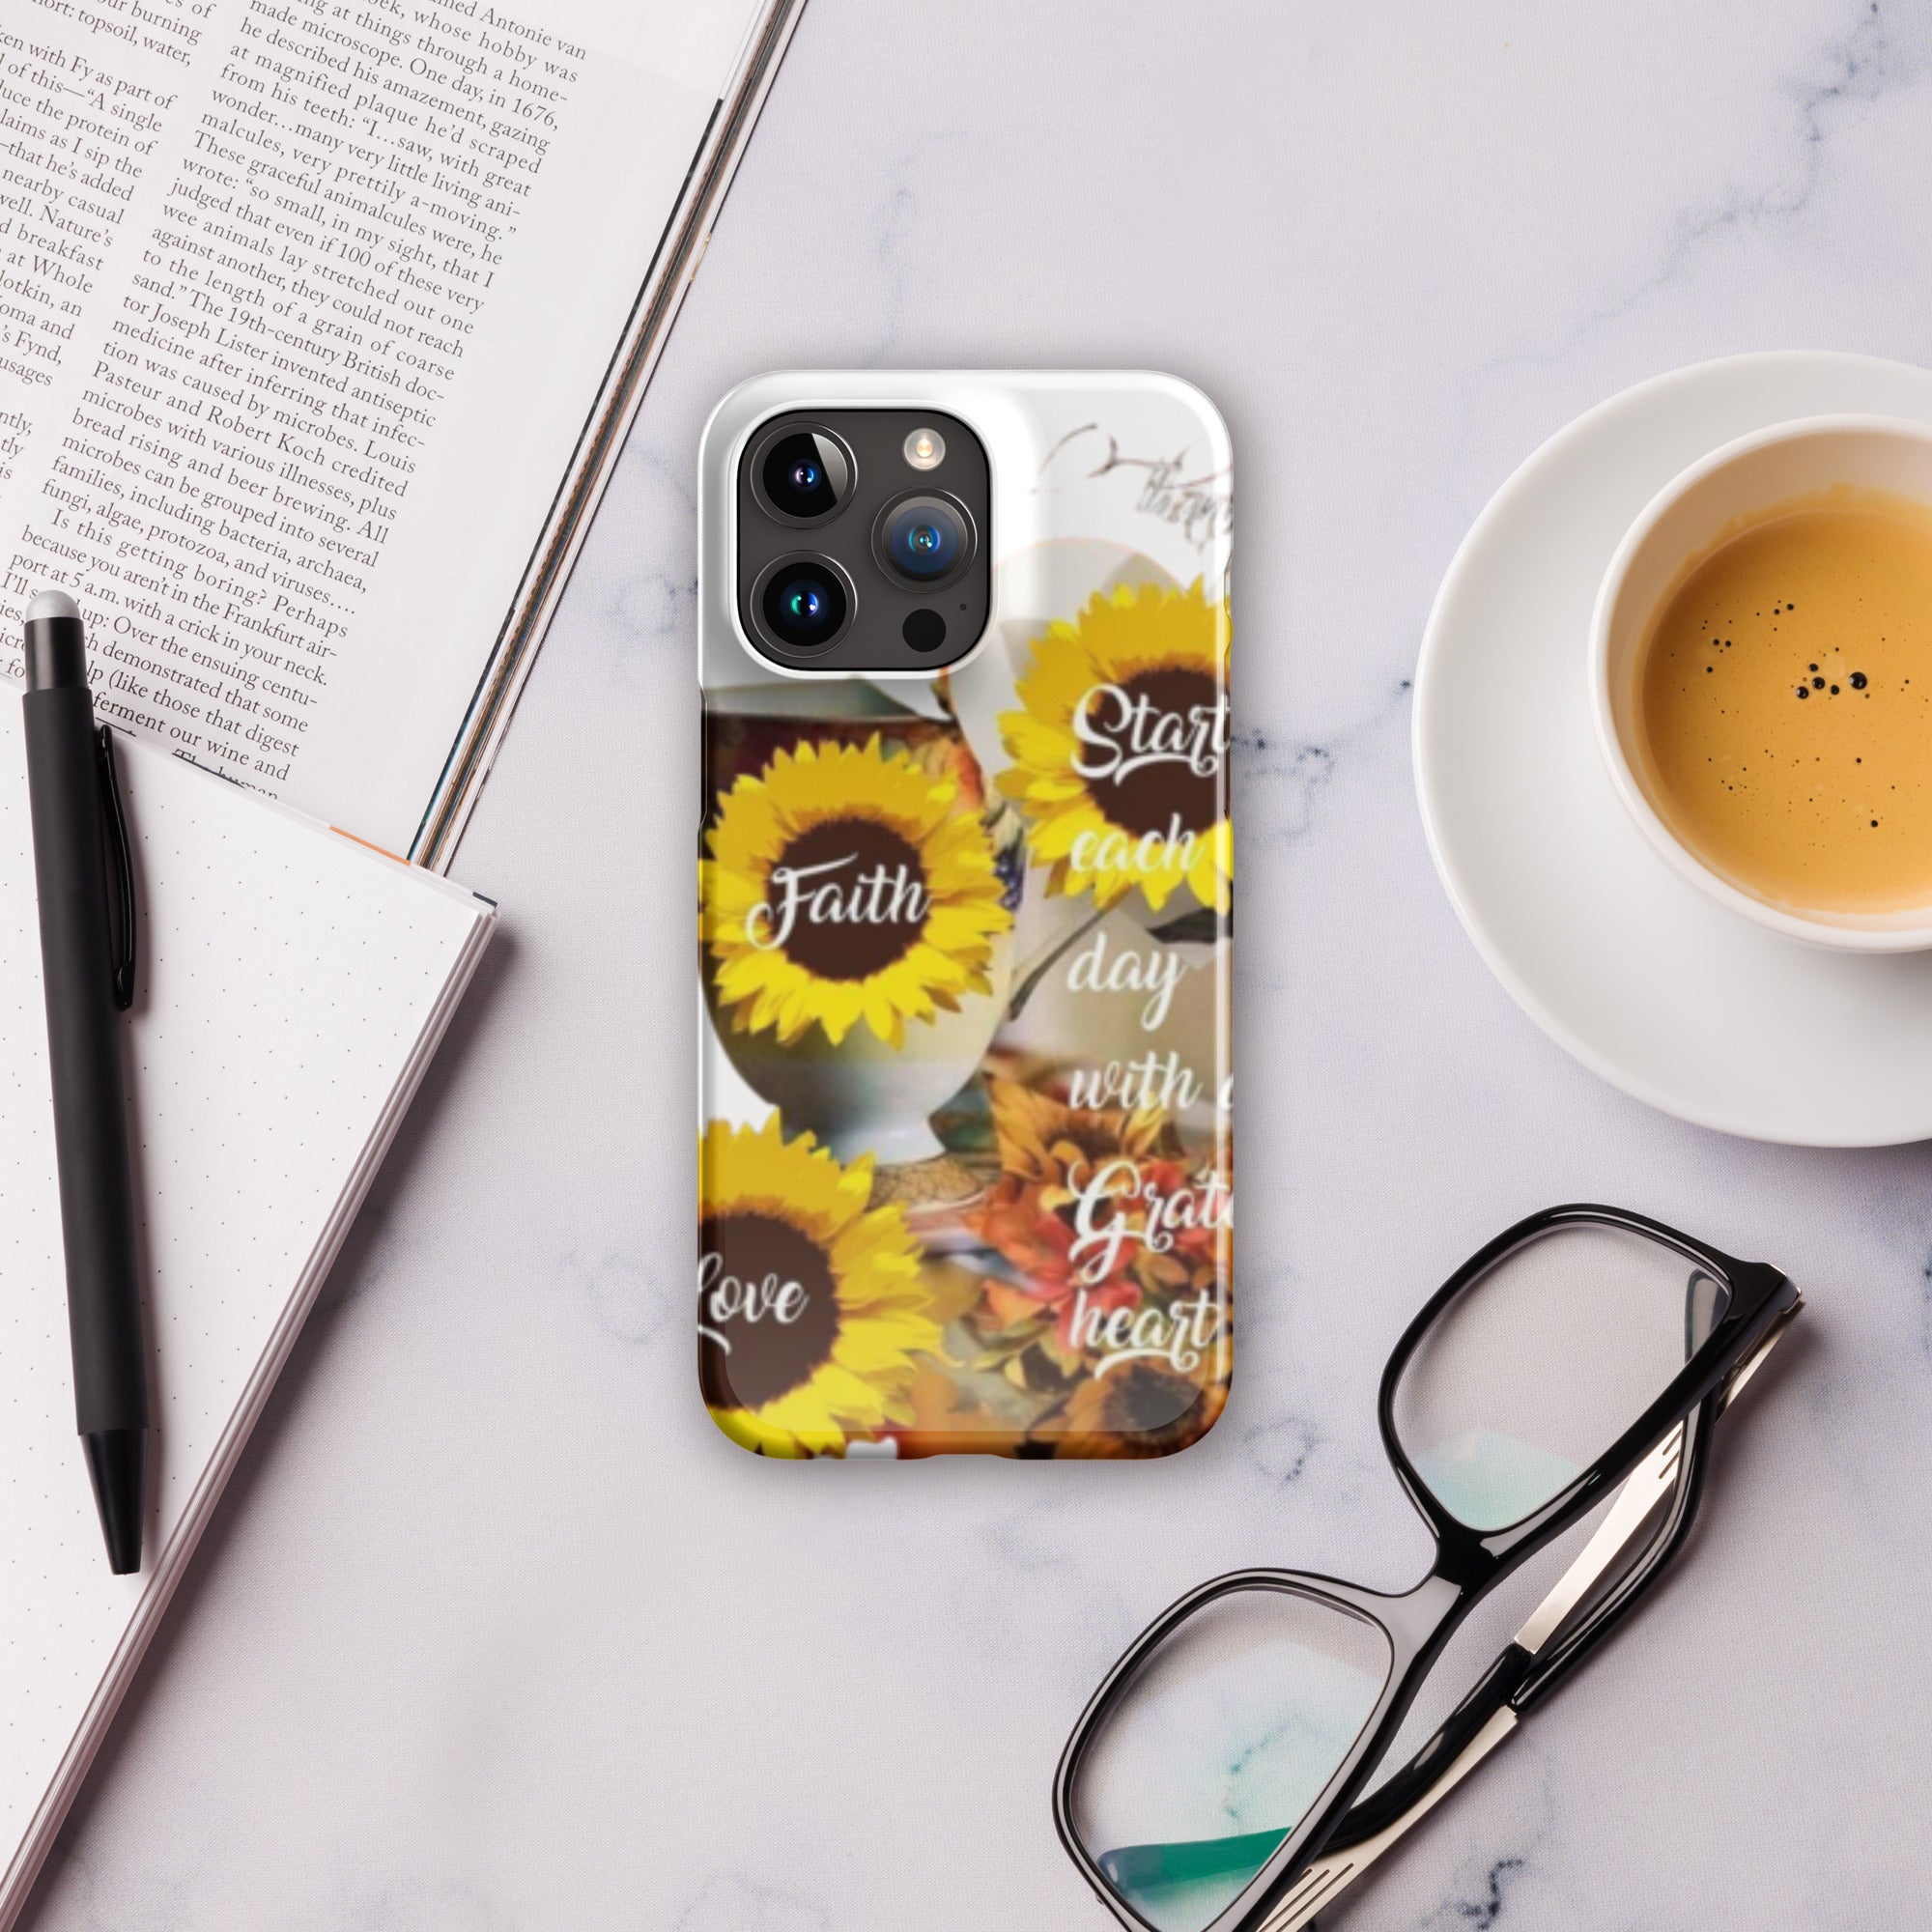 Buy Grateful Heart Snap Case for iPhone - Stylish Protection on the Go